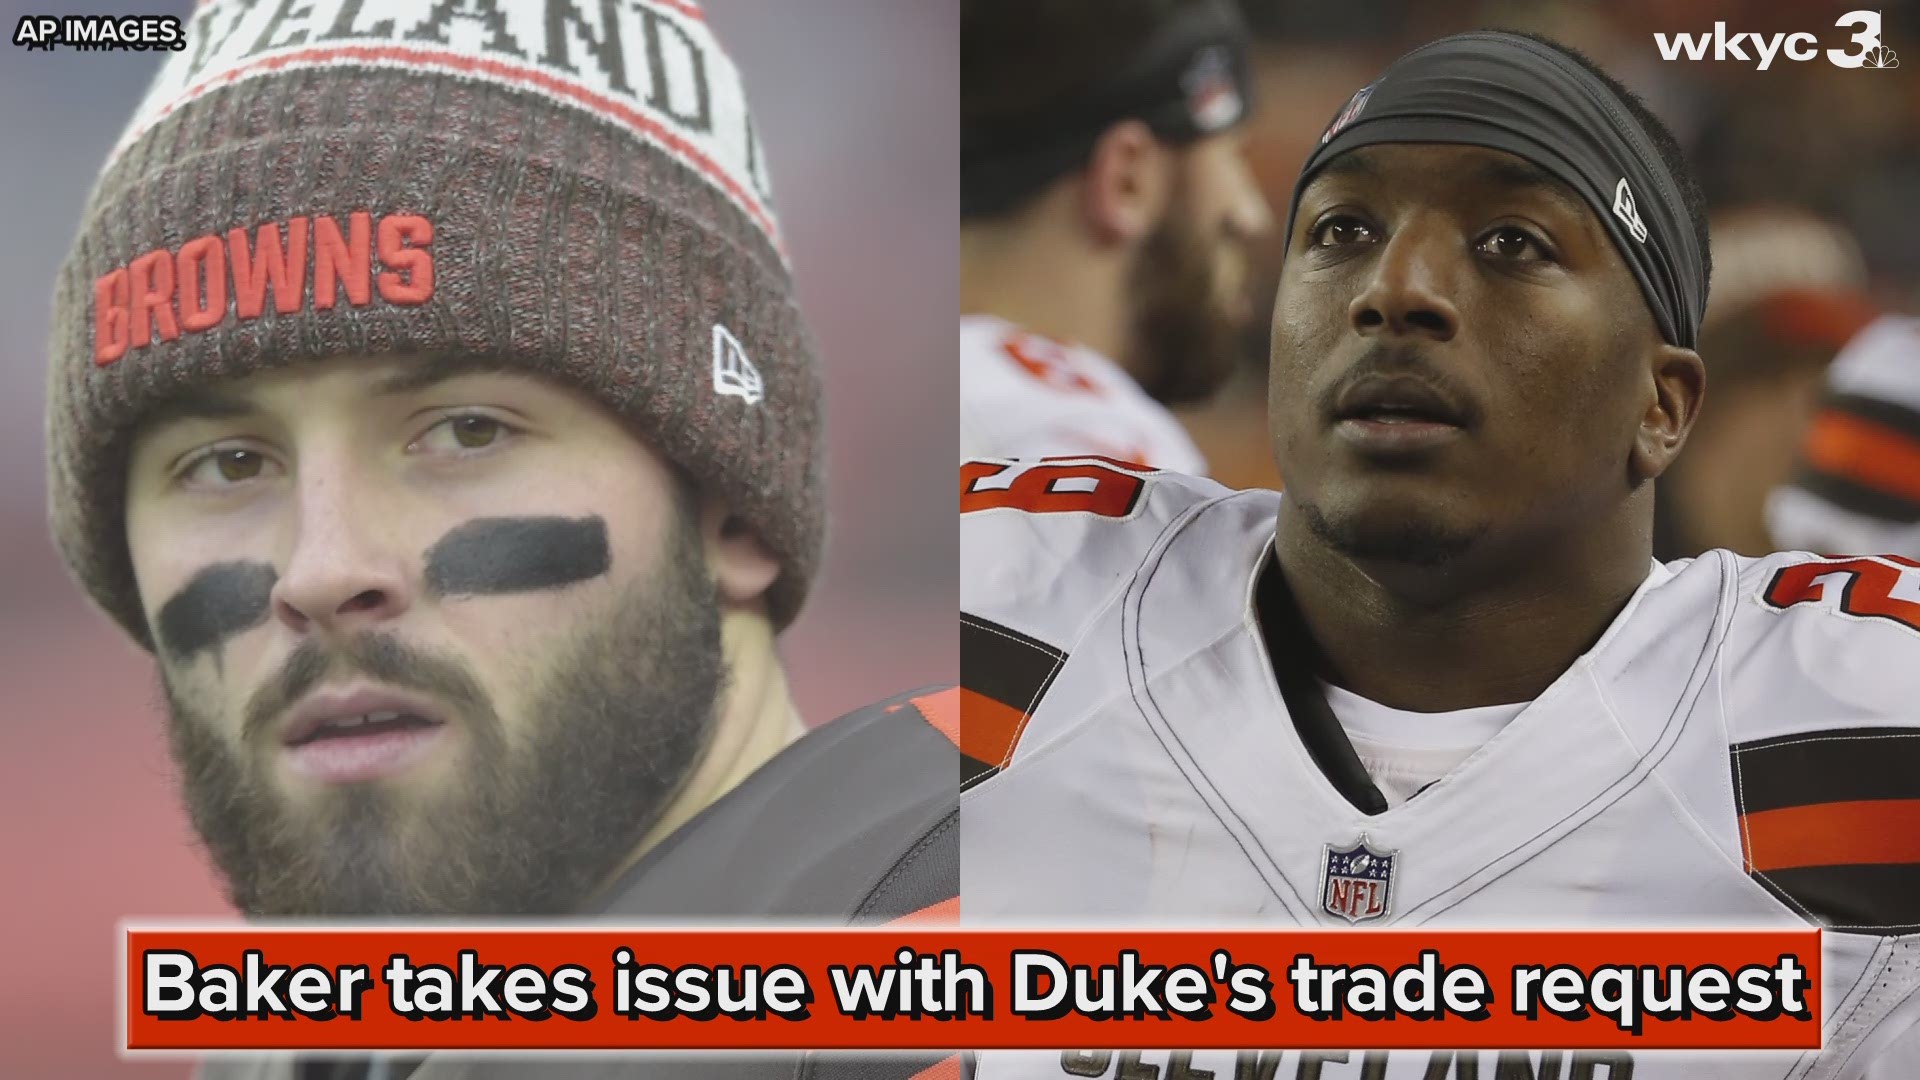 On Tuesday, Cleveland Browns quarterback Baker Mayfield made it clear he took issue with the way running back Duke Johnson handled his trade request from the team.